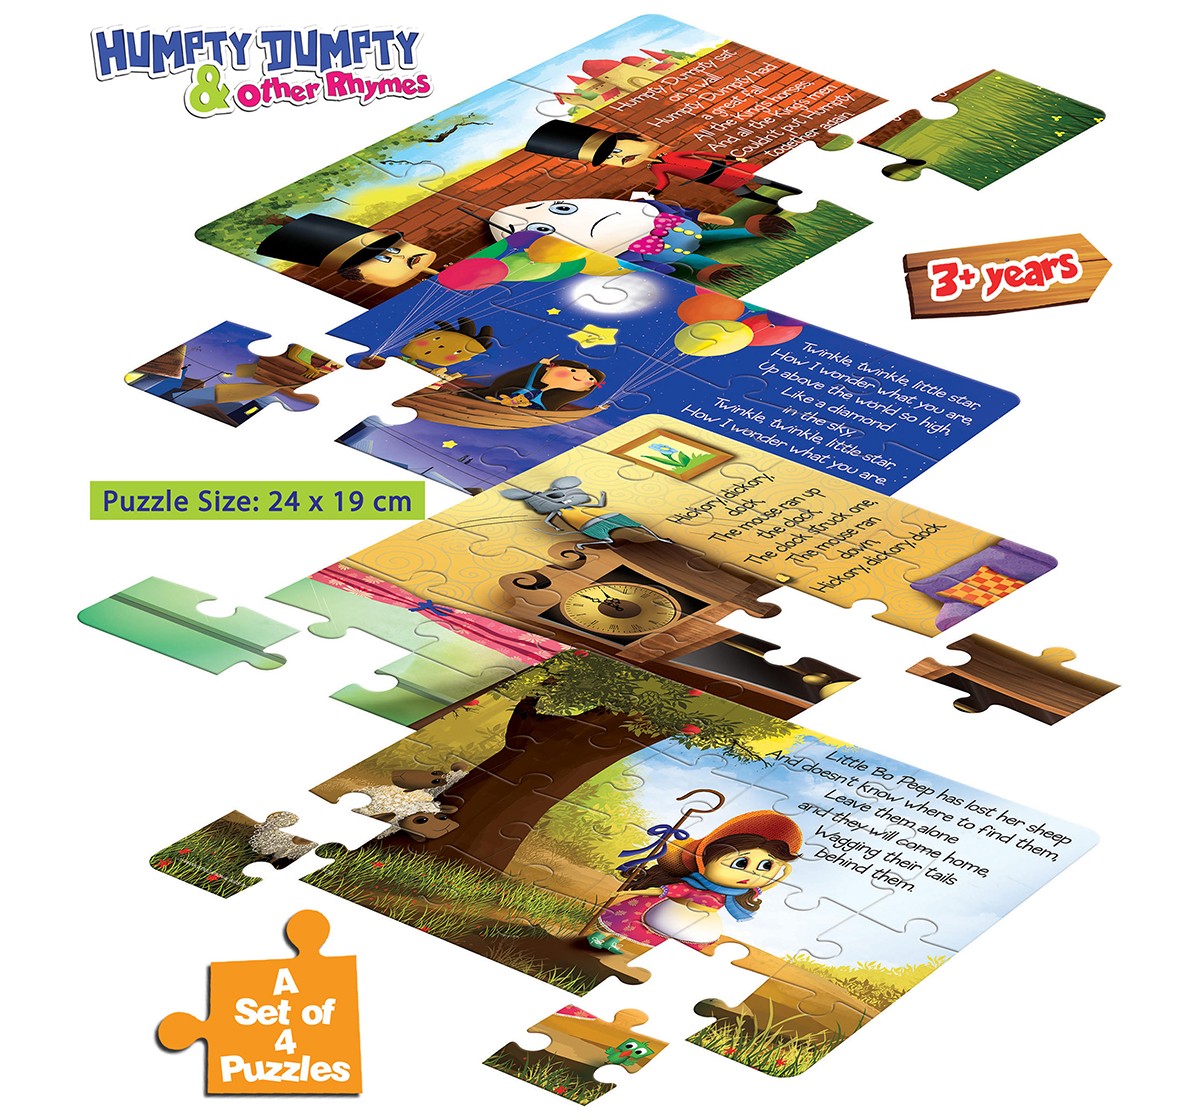 Frank Humpty Dumpty And Other Rhymes Puzzle Puzzles for Kids Age 3Y+